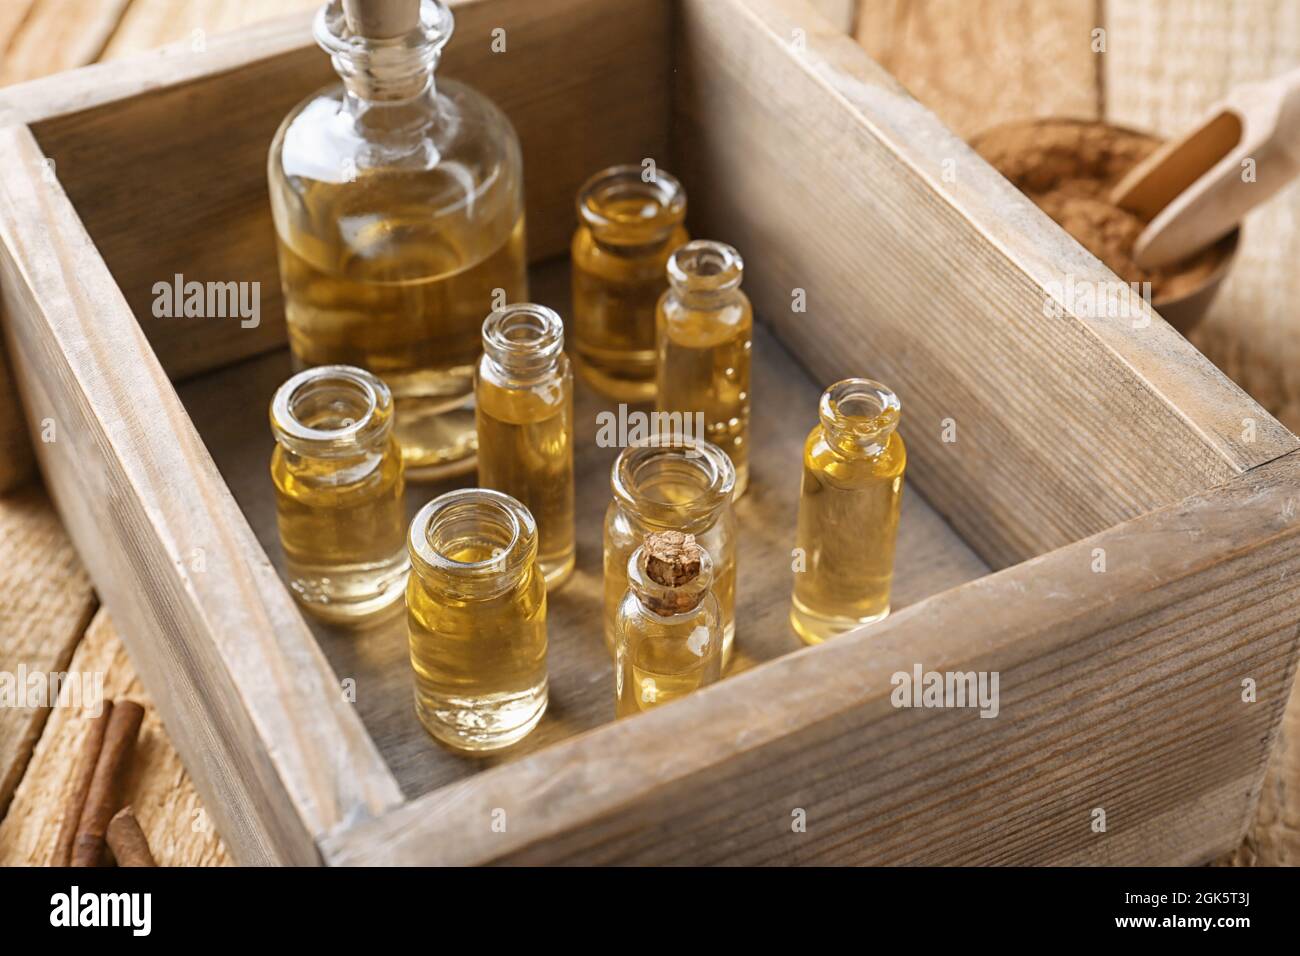 Bottles of cinnamon oil in box on wooden background Stock Photo